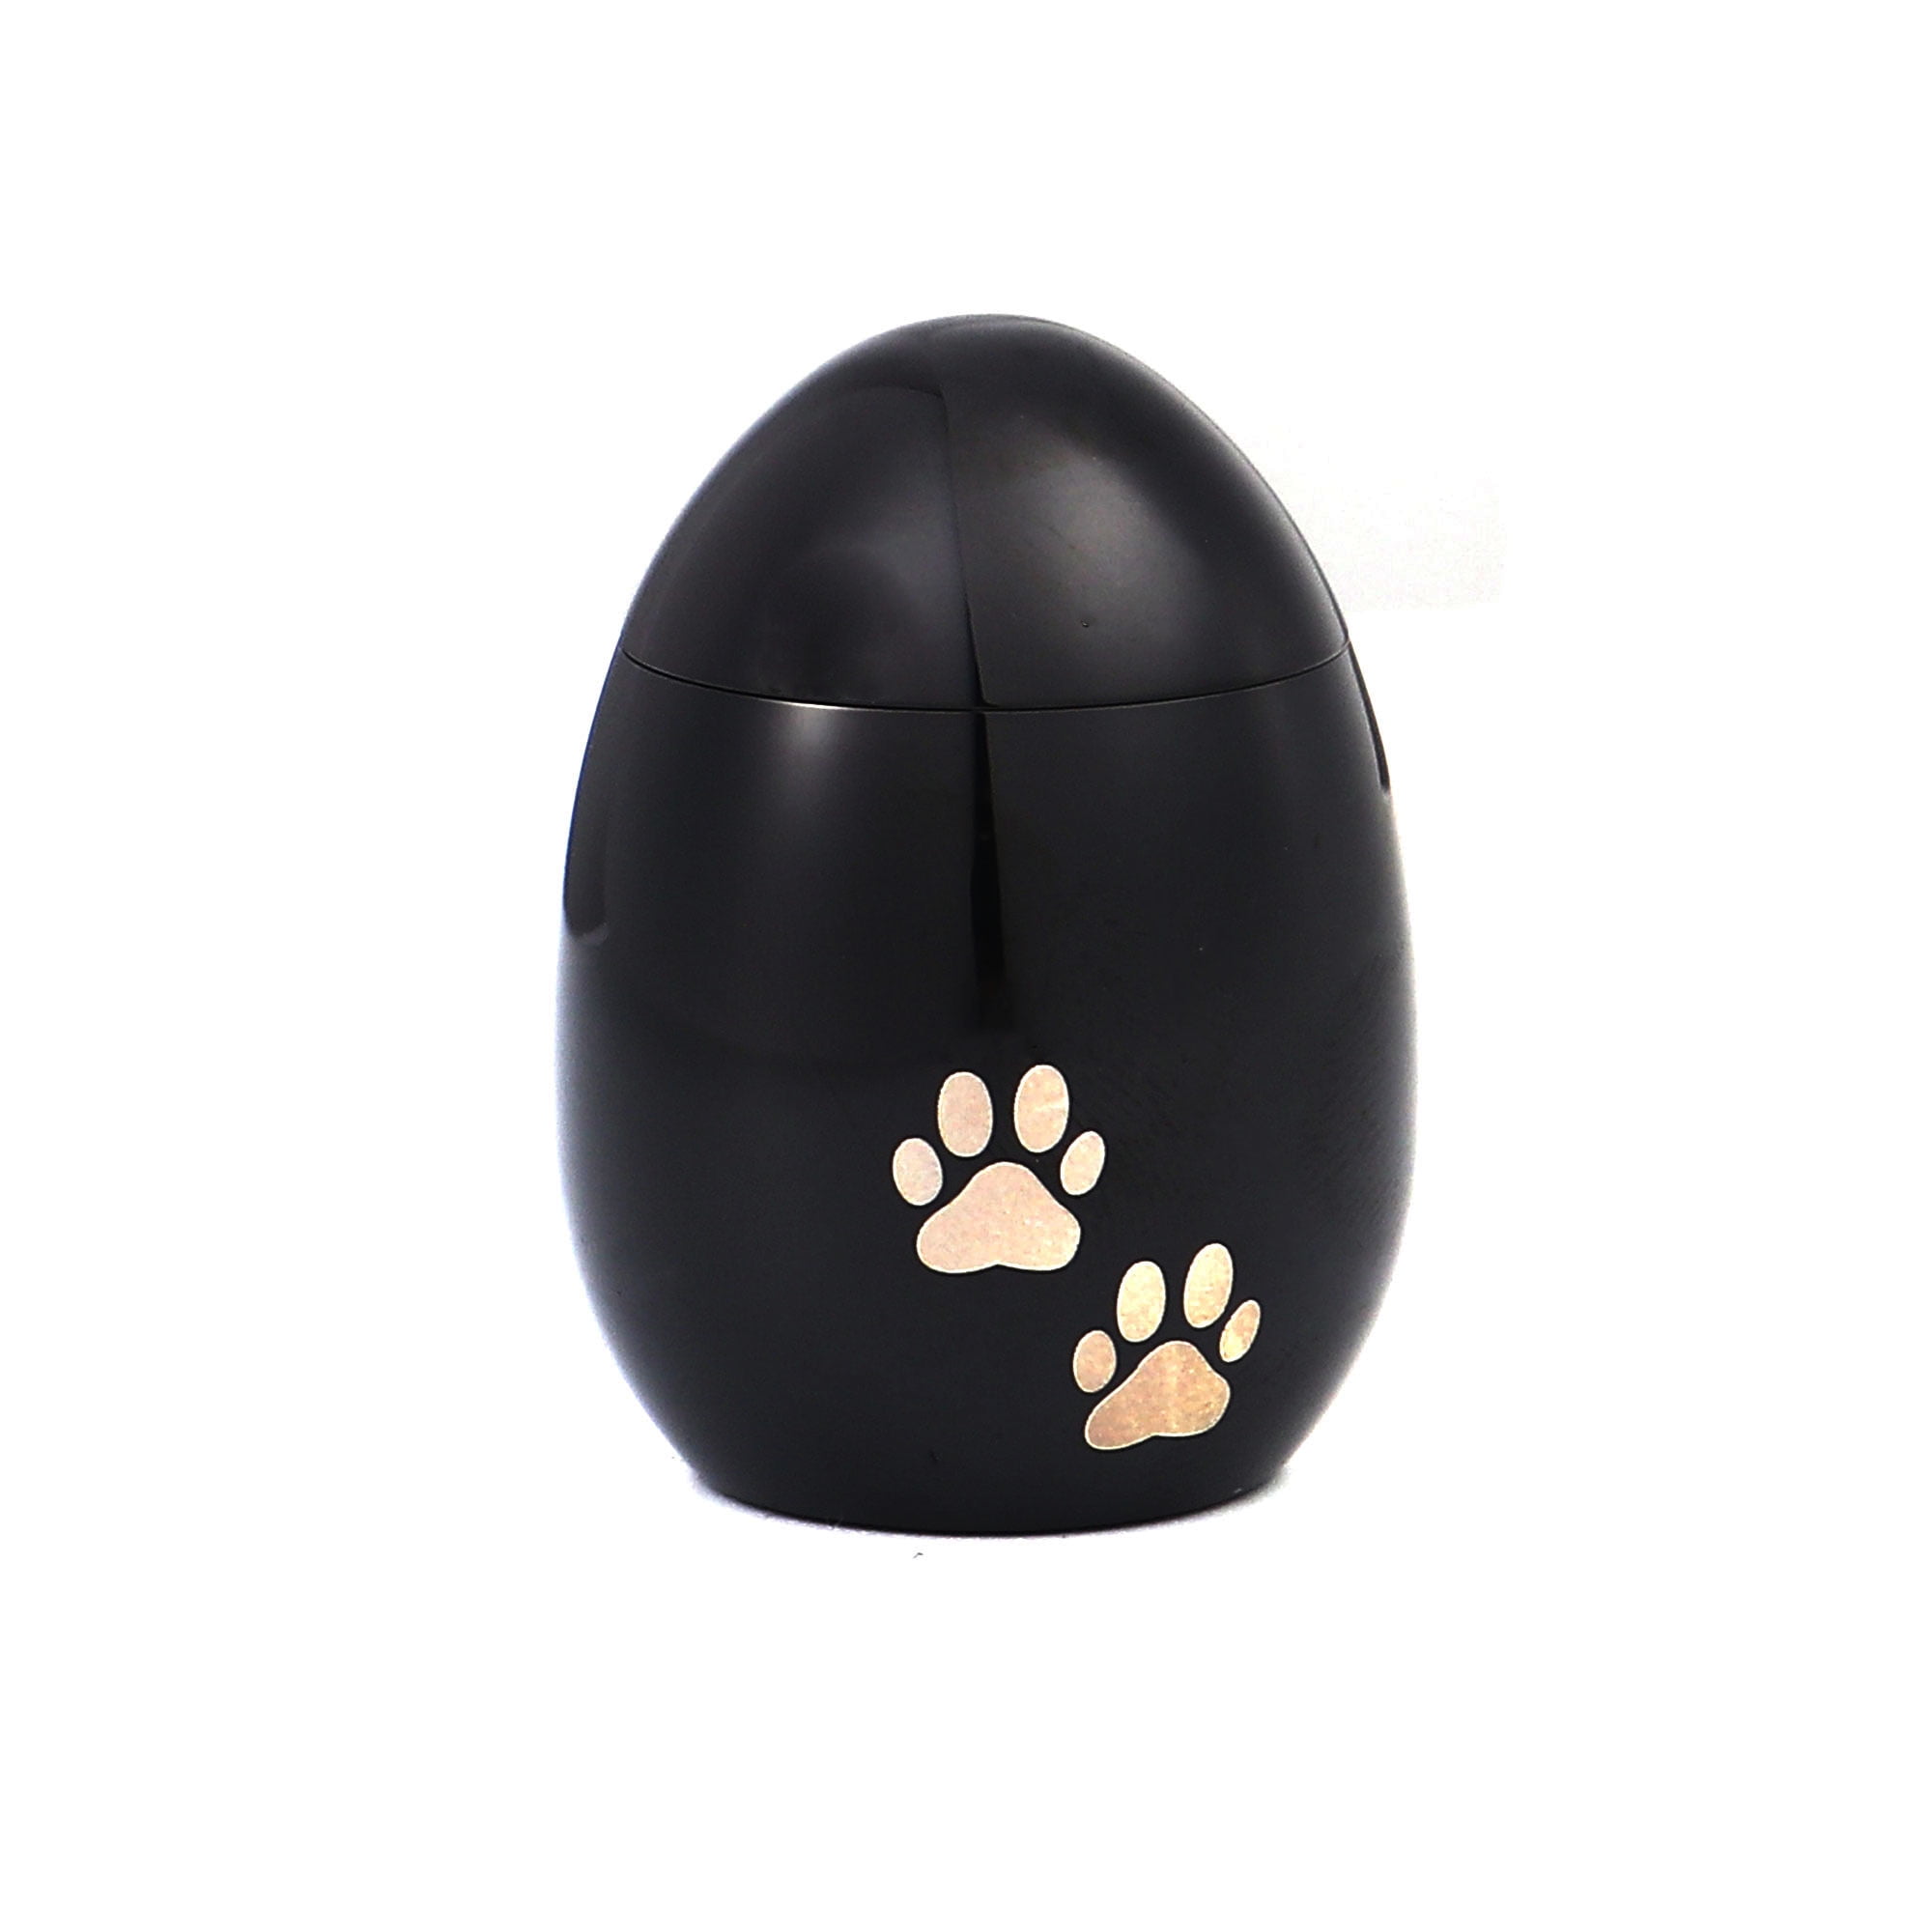 Cremation Urns for Pets Gold/Silver Tree Stainless Steel Urns Pets Dog Cat Birds Mouse Cremation Ashes Urn Keepsake Casket Columbarium Pets Memorials